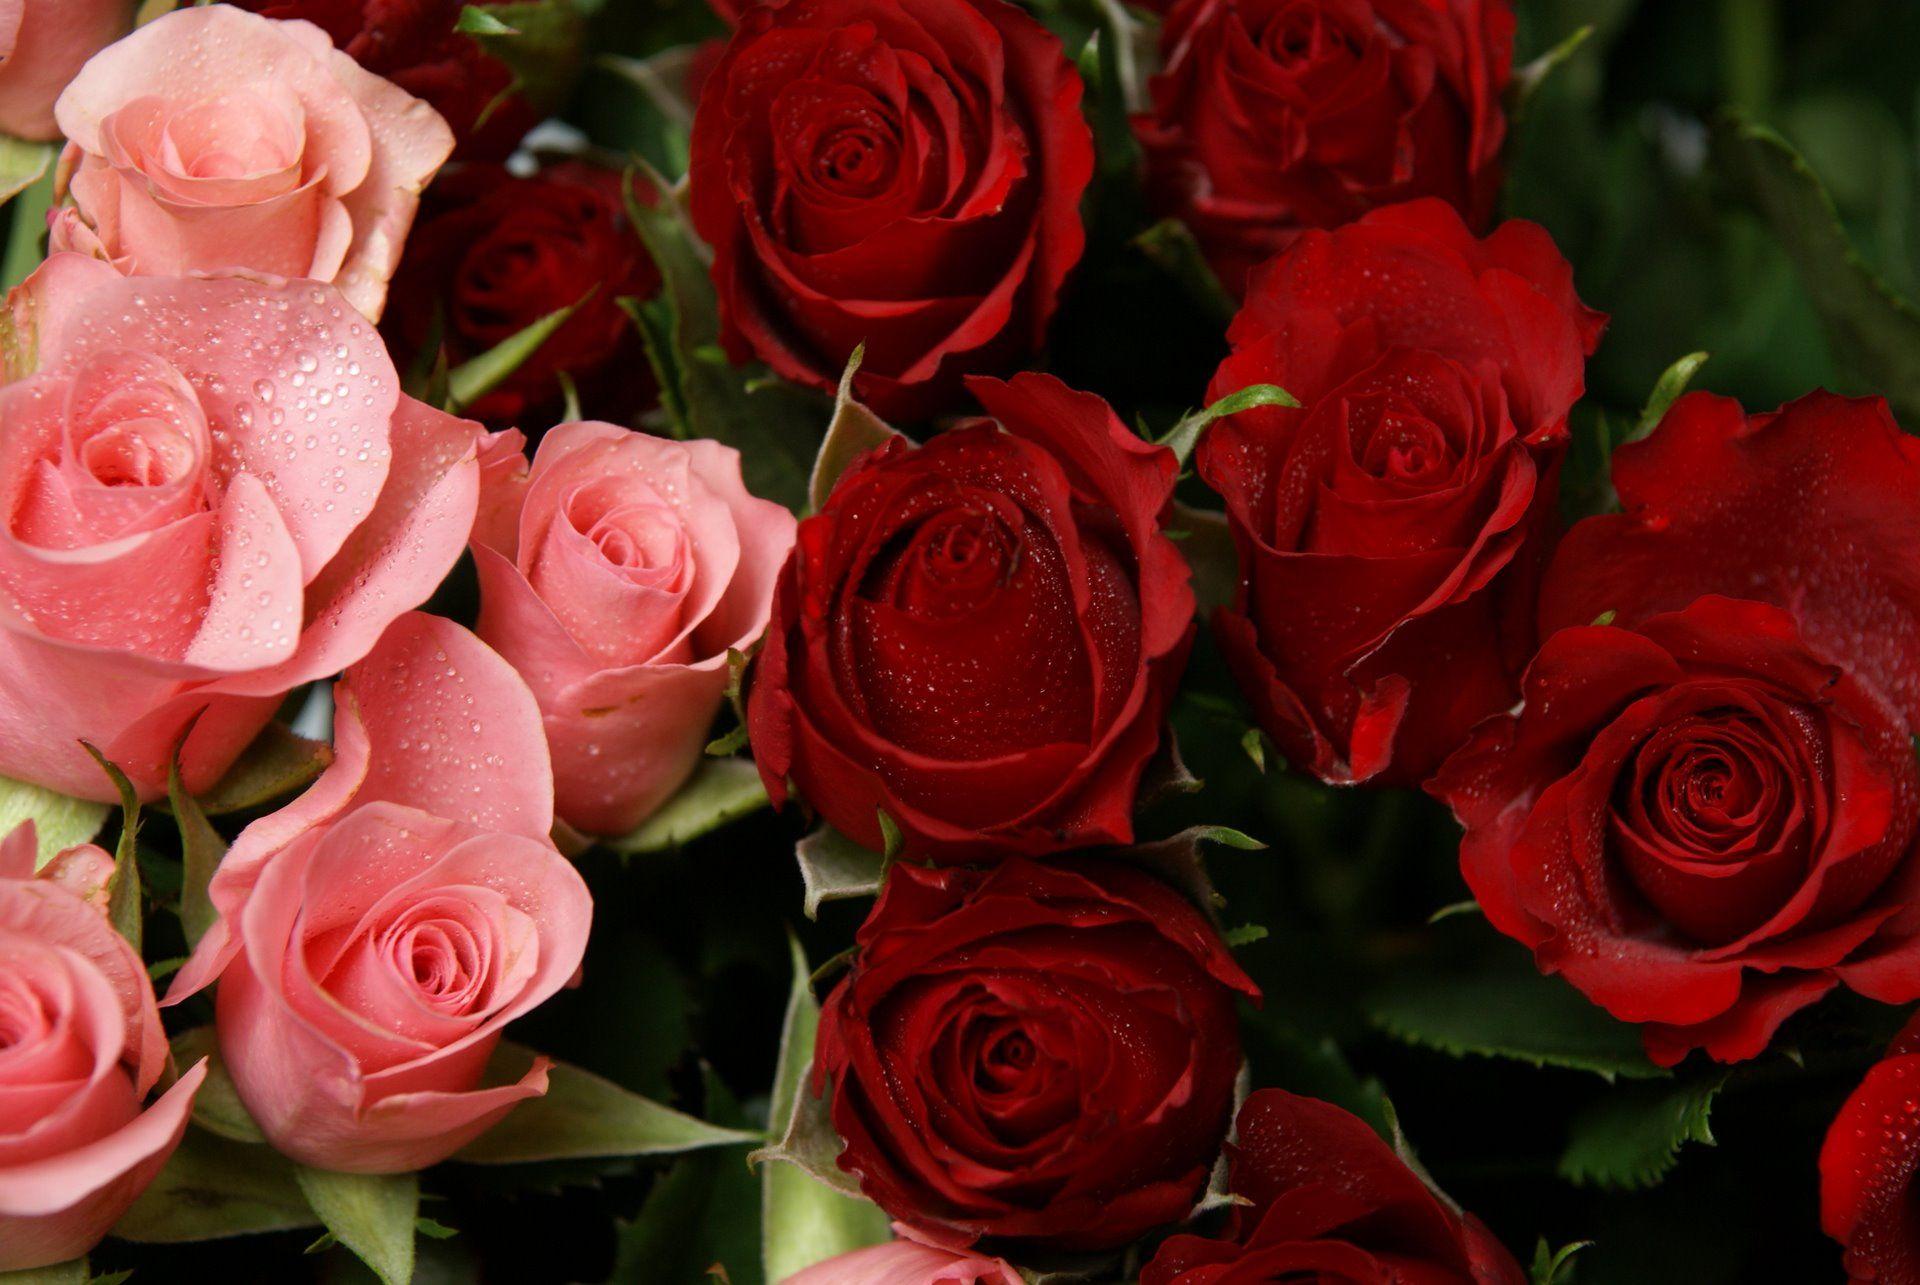 Red And Pink Rose Pics Gallery Full HD Wallpaper For Mobile High